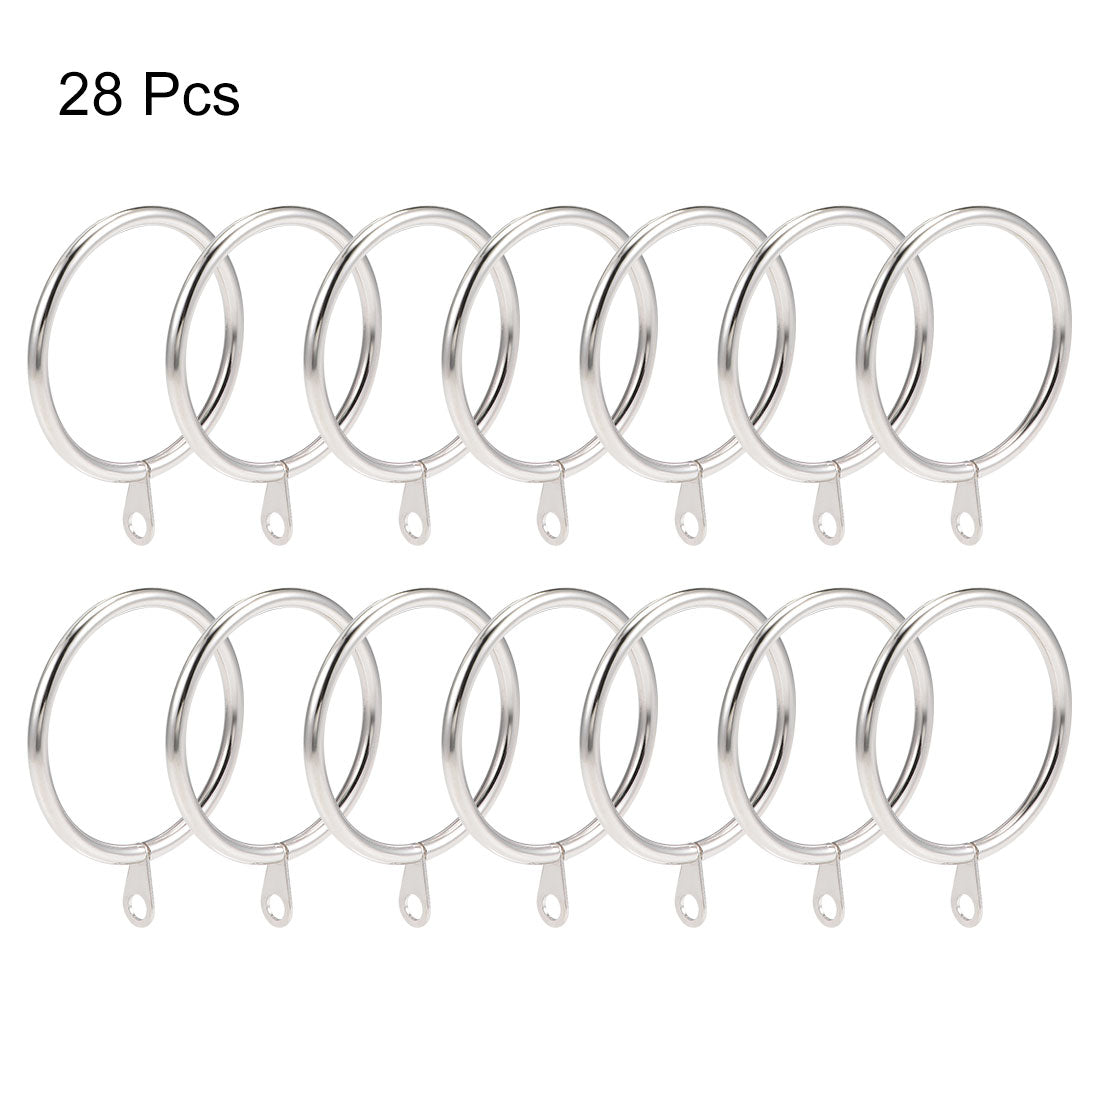 uxcell Uxcell Curtain Rings Metal 45mm Inner Dia Drapery Ring for Curtain Rods Silver Tone 28 Pcs